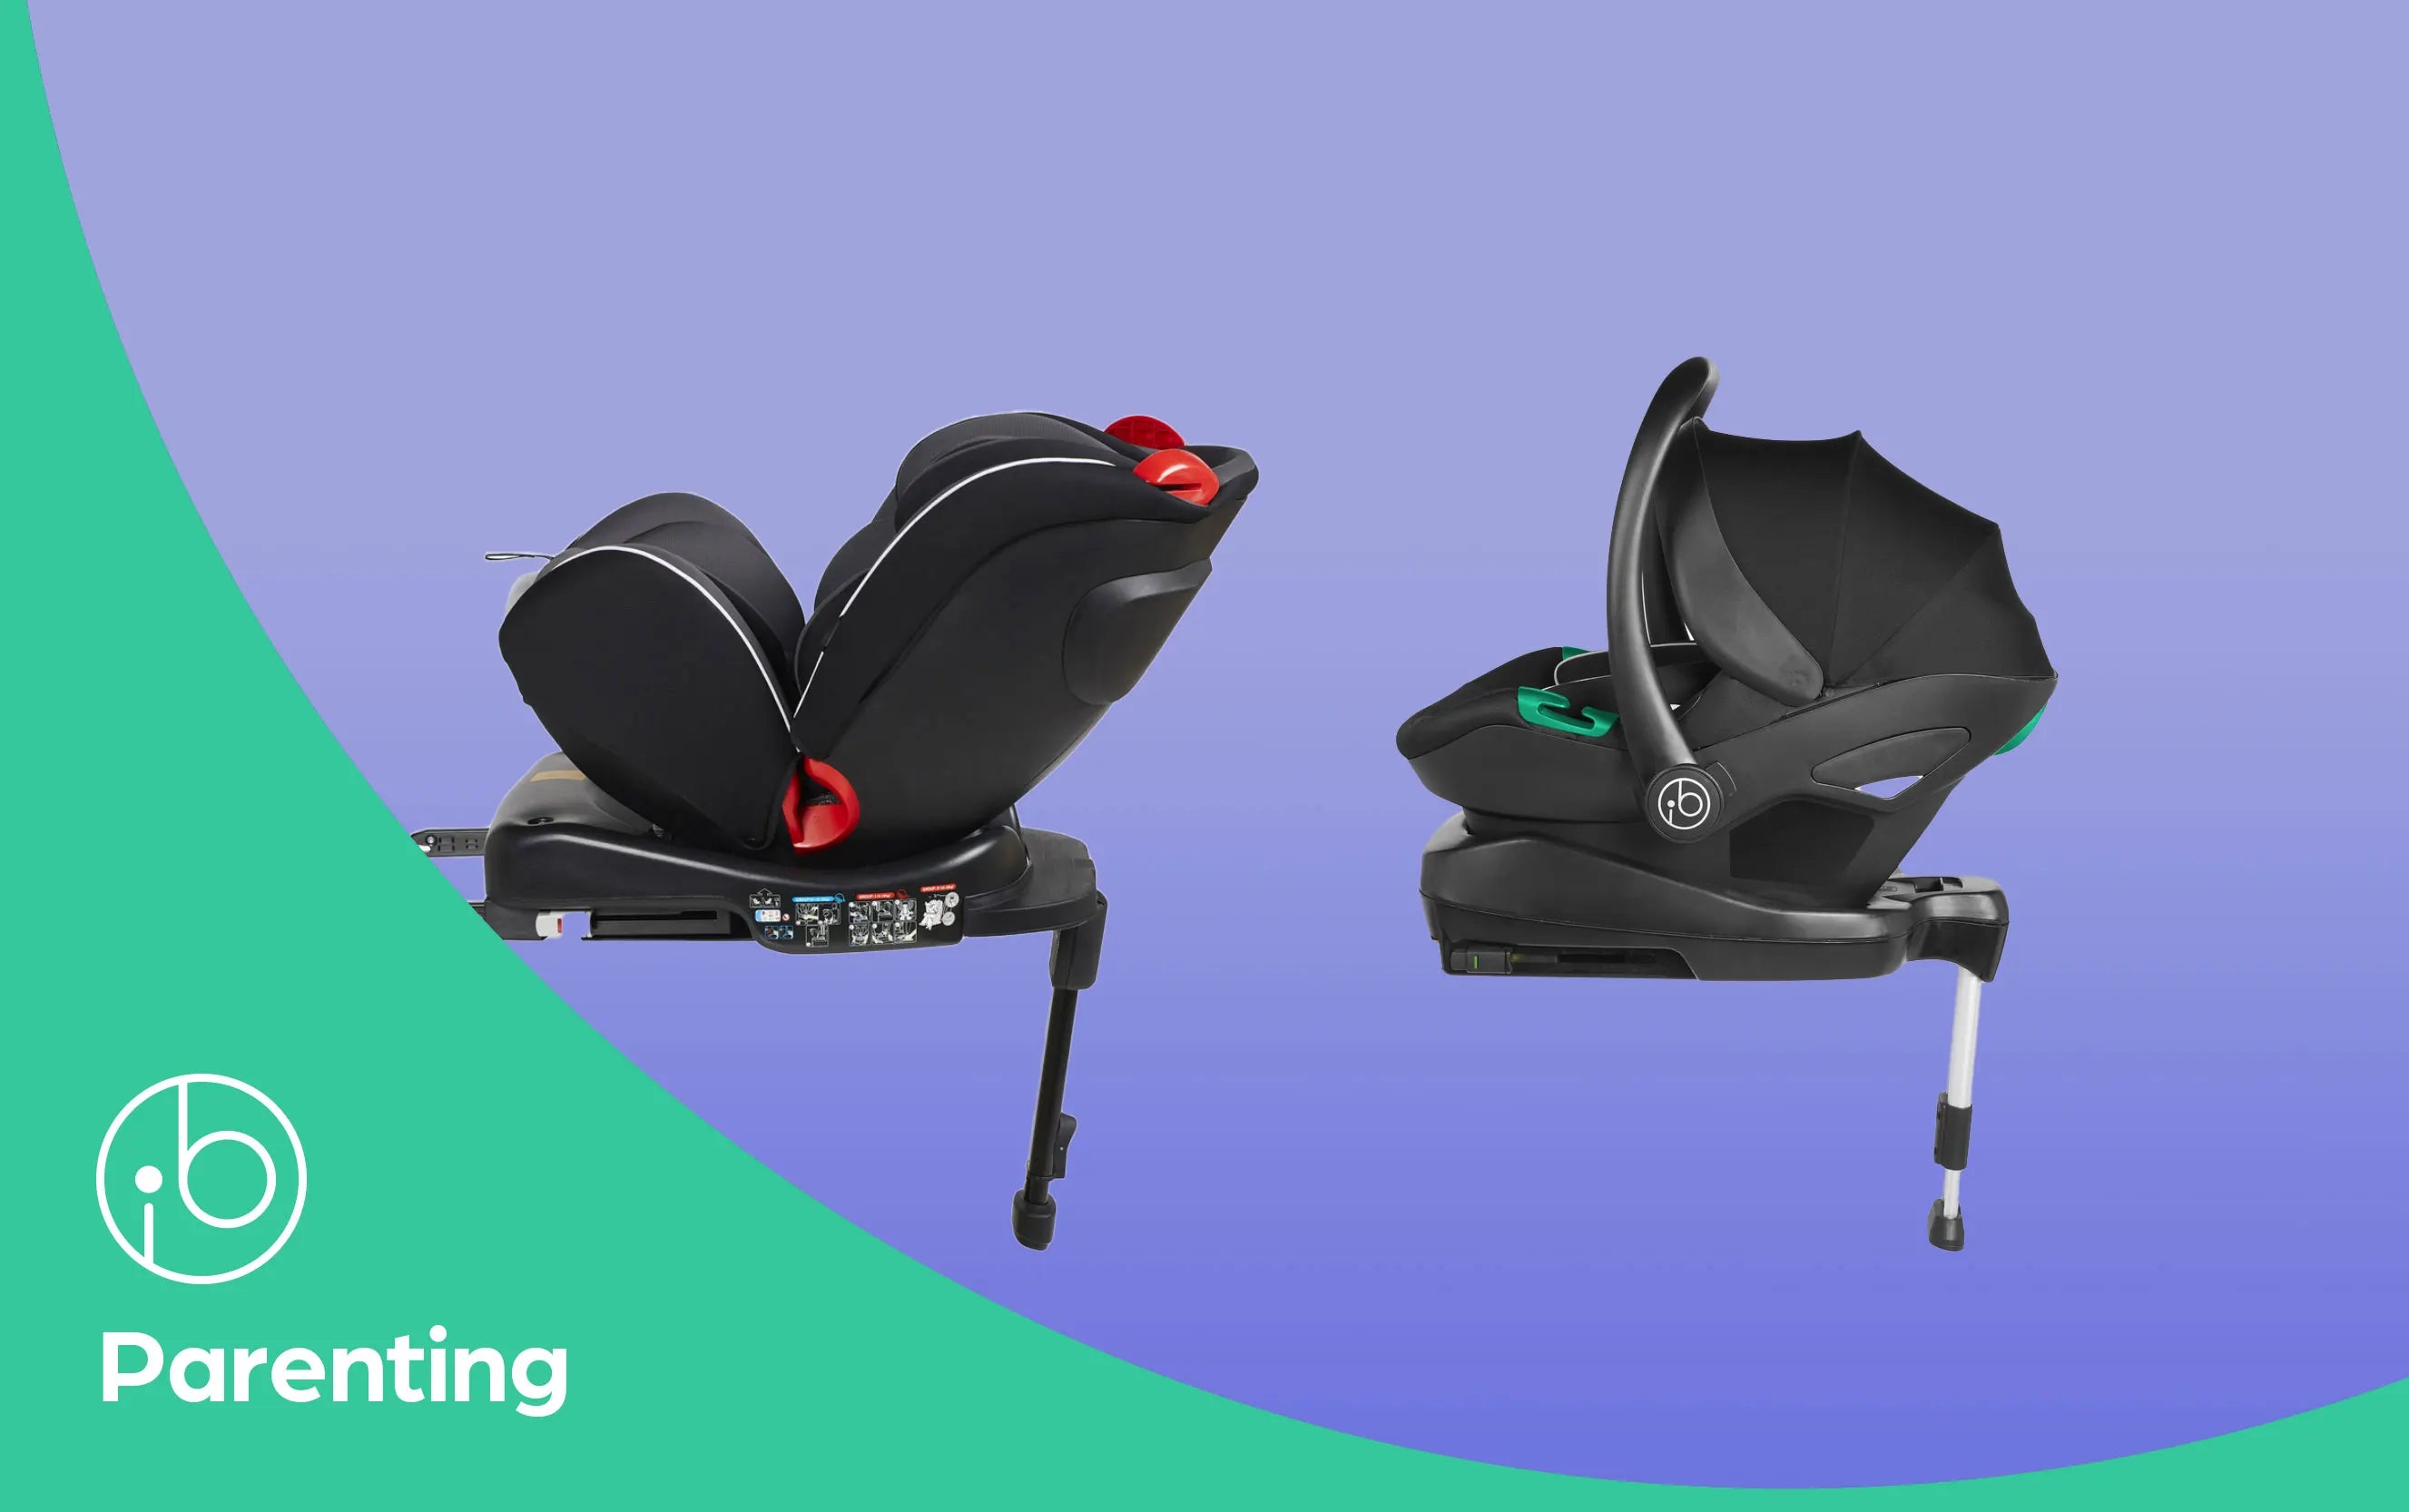 CYBEX ISOFix Connect Guides